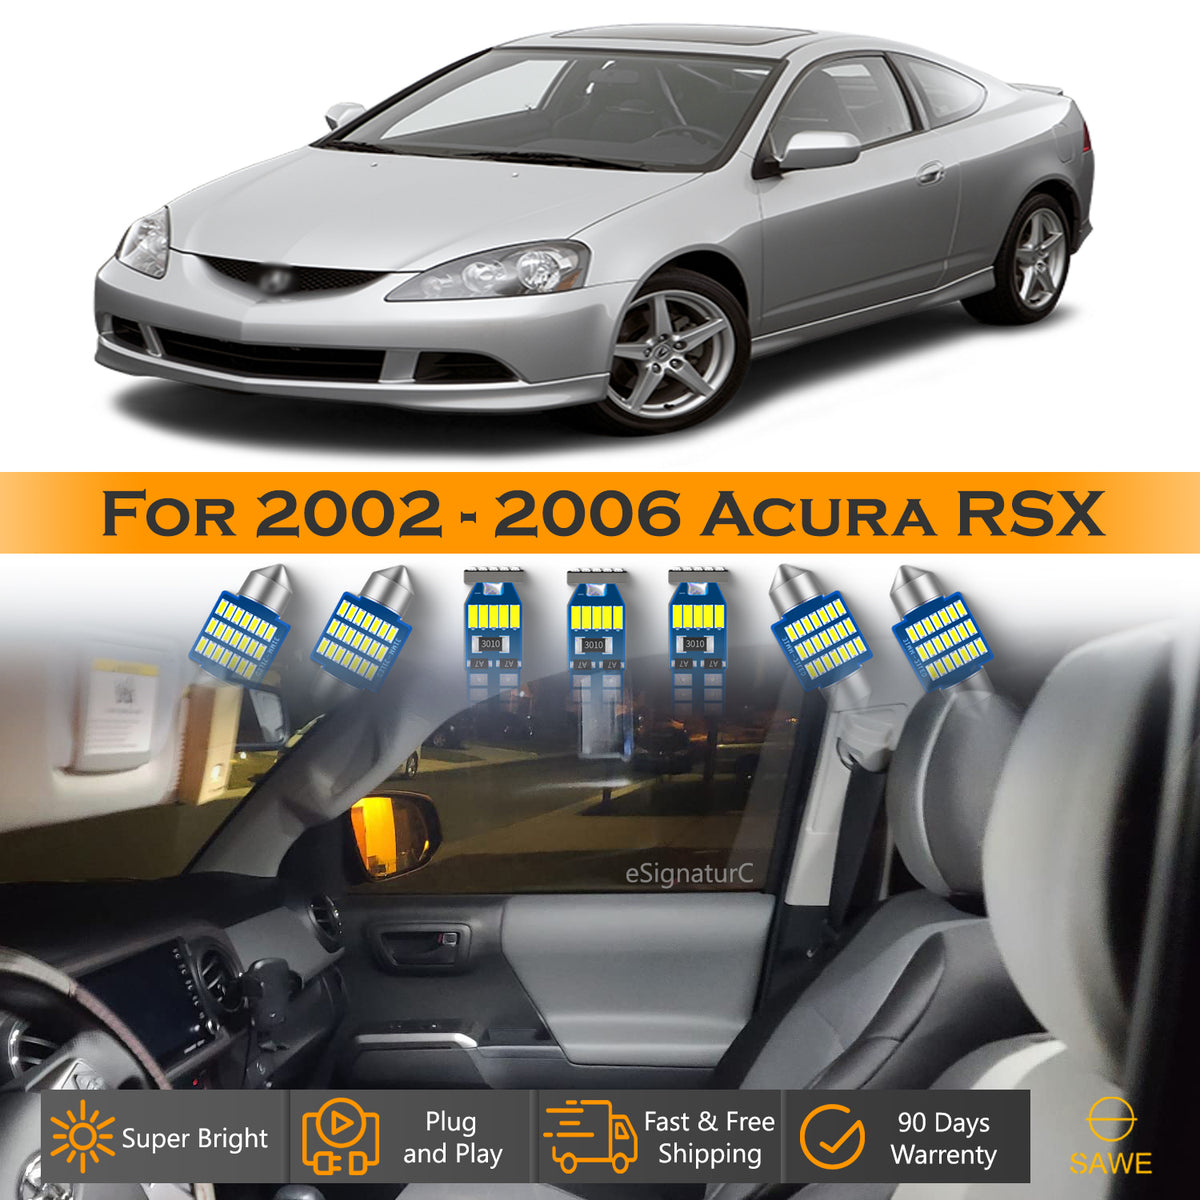 For Acura RSX Interior LED Lights - Dome & Map Light Bulbs Package Kit for 2002 - 2006 - White